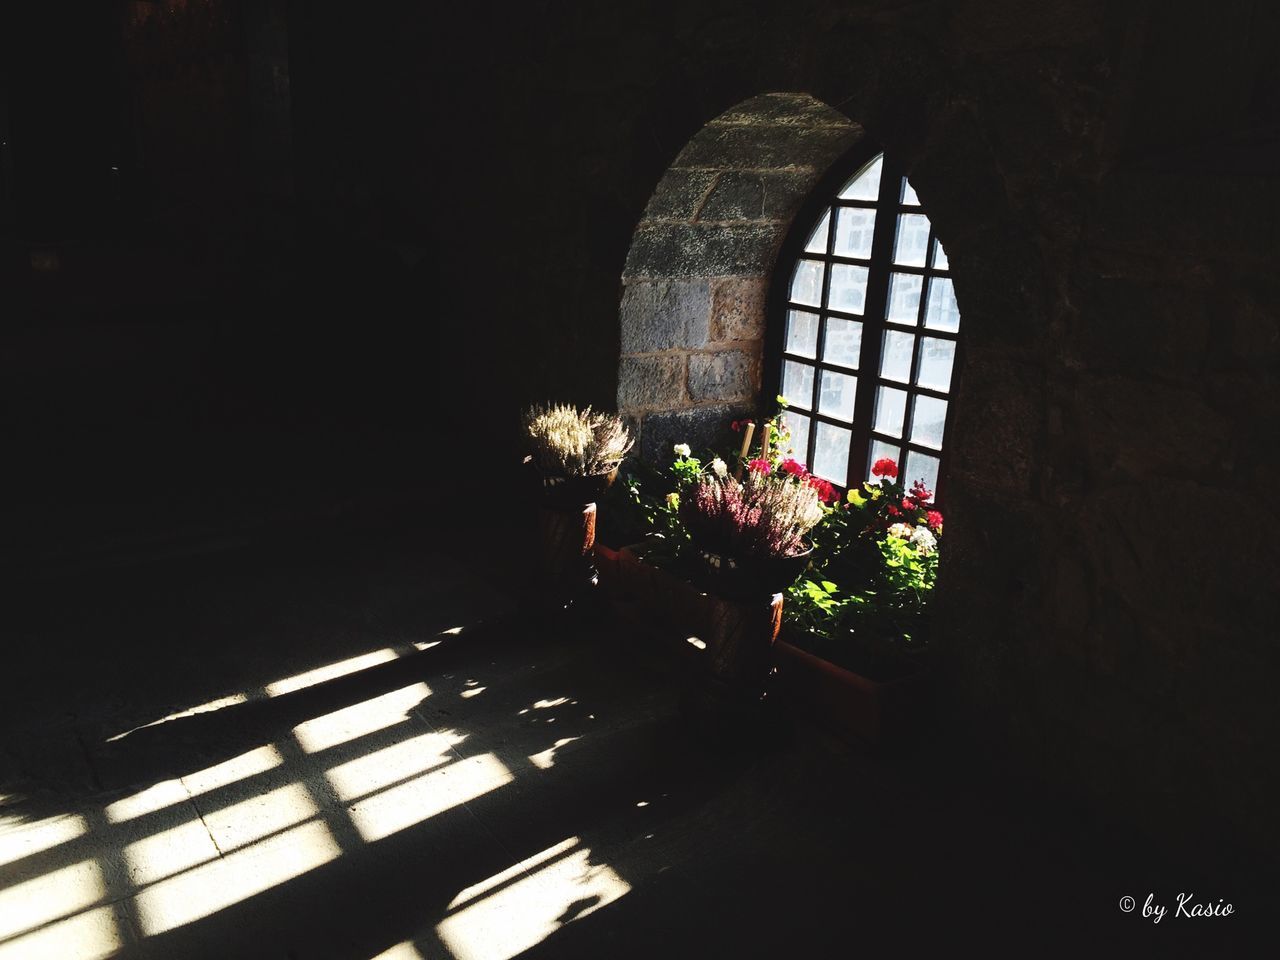 indoors, architecture, built structure, window, growth, building exterior, plant, glass - material, dark, low angle view, potted plant, flower, no people, sunlight, day, clear sky, home interior, tree, house, building